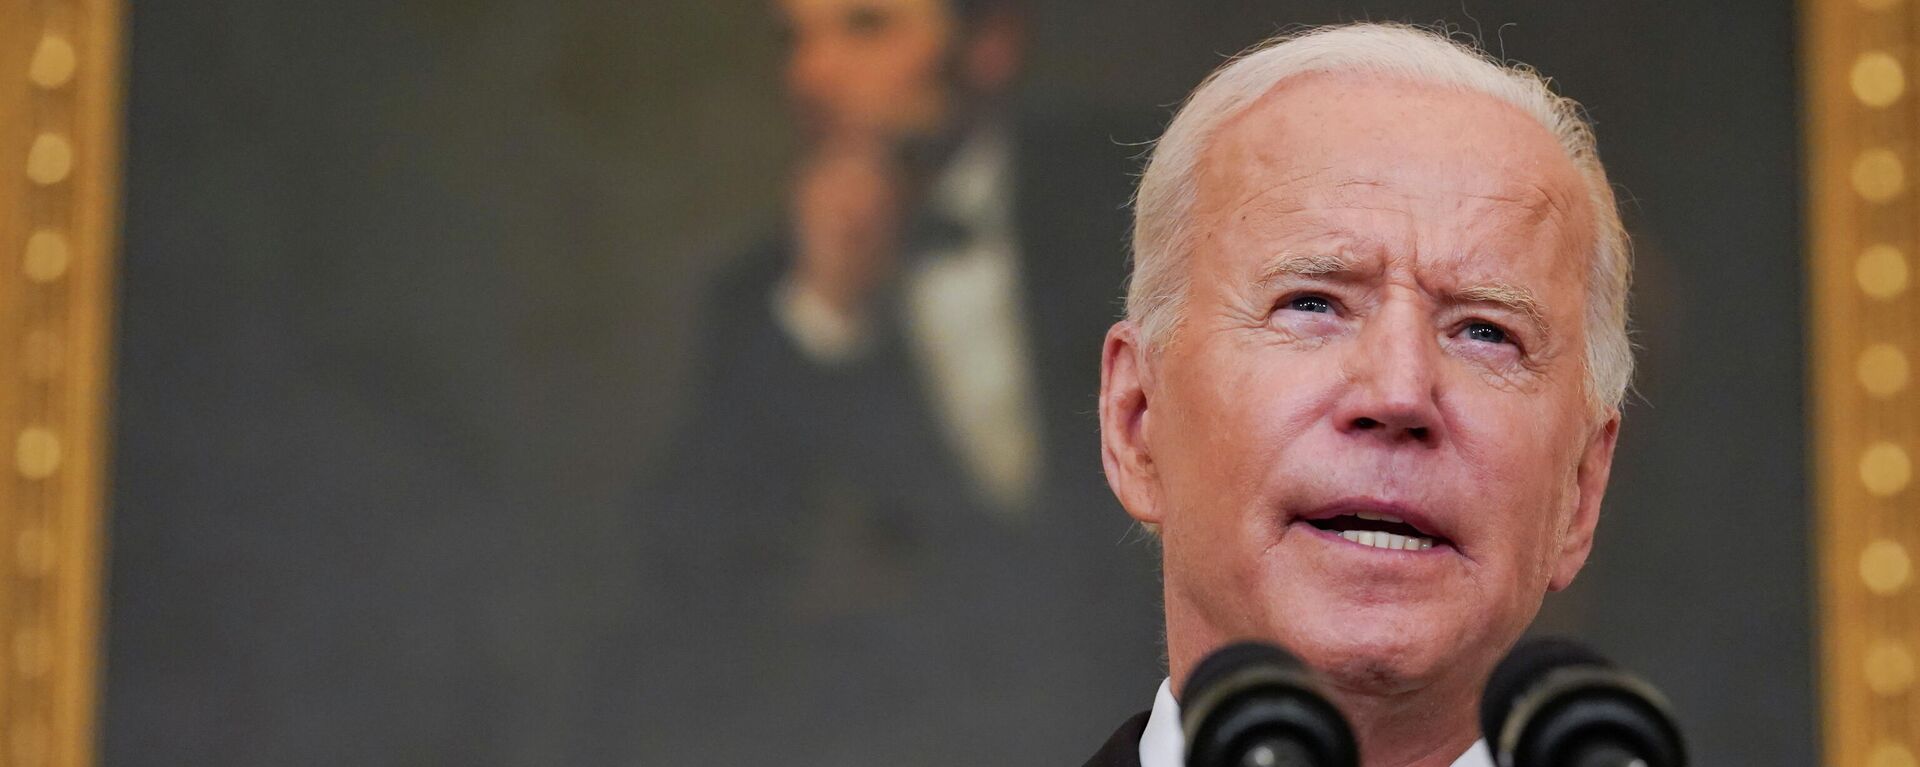 US President Joe Biden delivers remarks on the Delta variant and his administration's efforts to increase vaccinations, from the State Dining Room of the White House in Washington, US, September 9, 2021 - Sputnik International, 1920, 14.09.2021